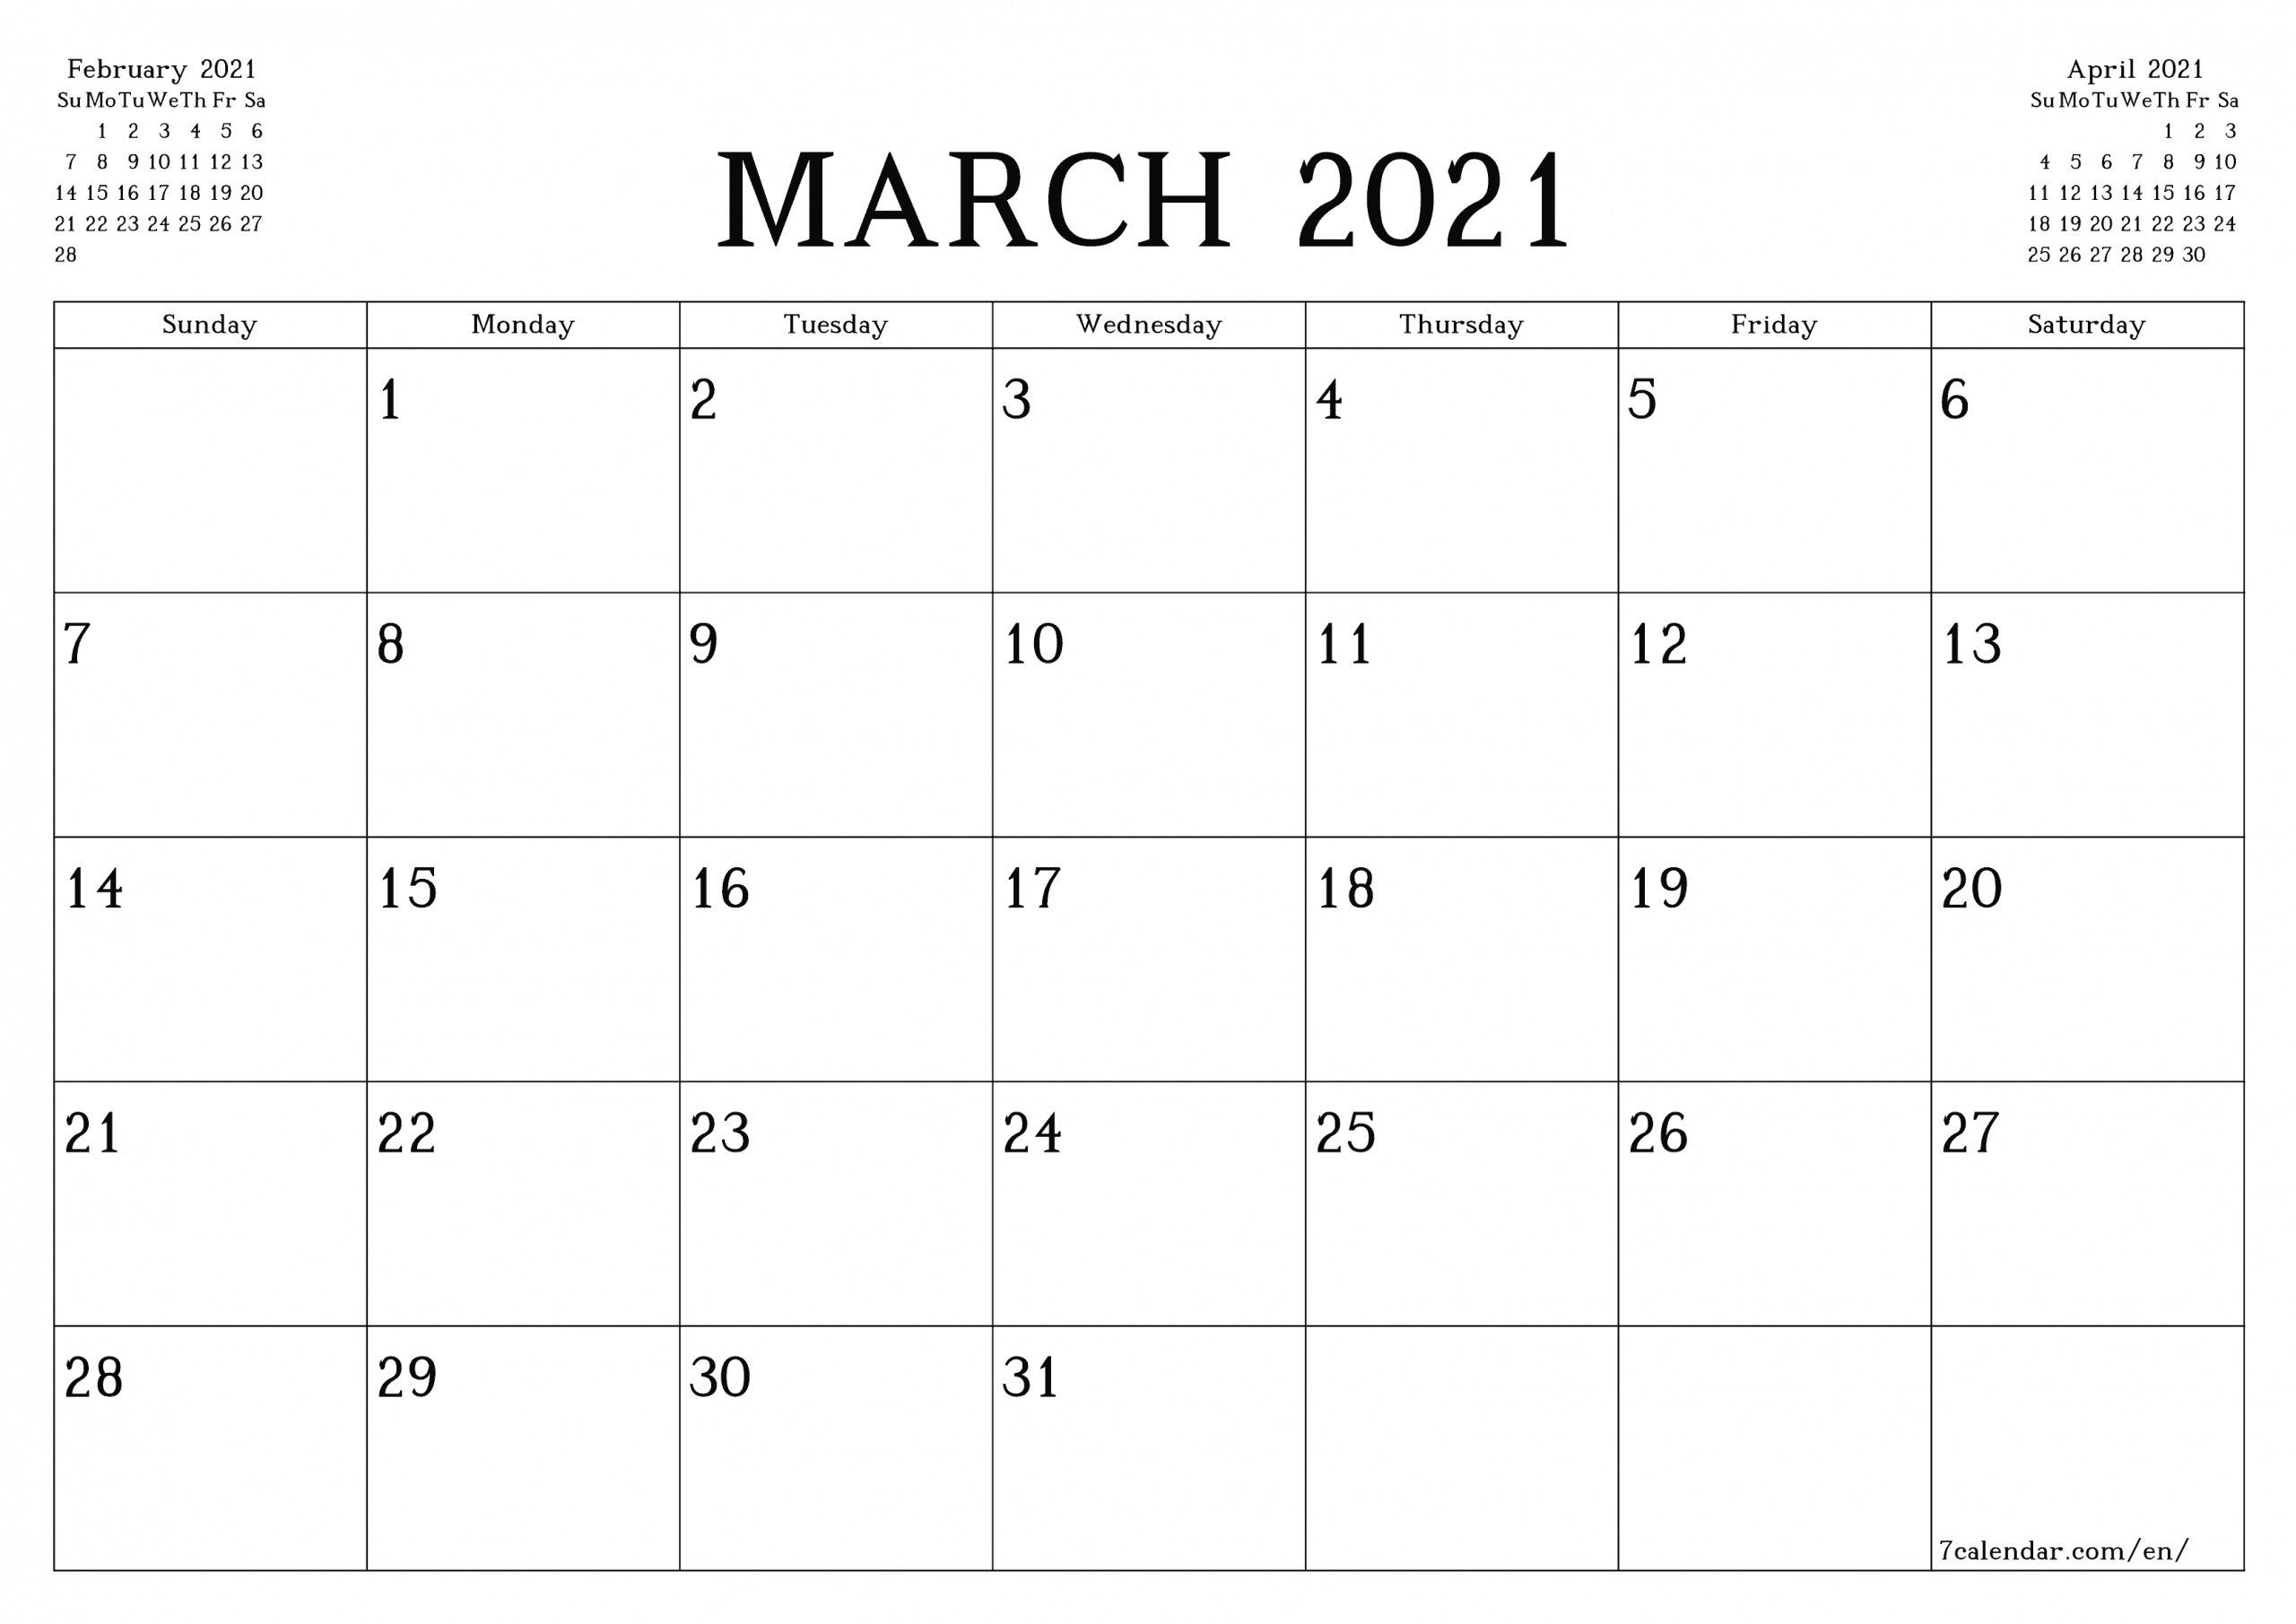 Blank Monthly Calendar 2021 June 2021 With Grid | Calendar pertaining to Calendars Printable 2021 Free With Grid Lines